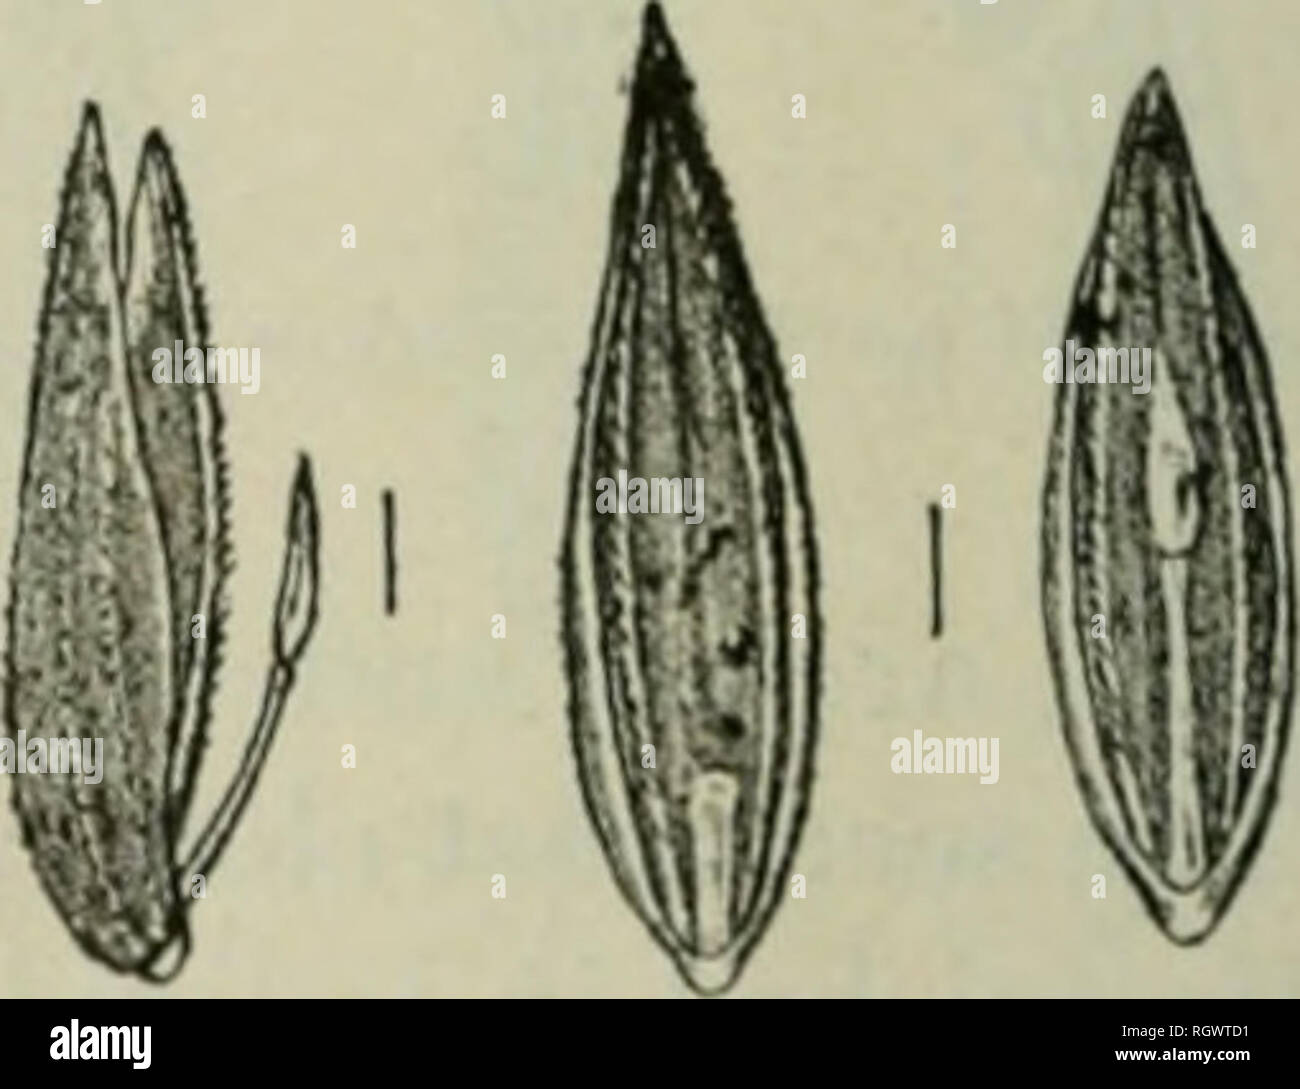 . Bulletin. 1901-13. Agriculture; Agriculture. f 3 Pi0, is.—Seeds ol Ftw tudetica: a and b, back viewB; c i ,side views; .rami g, fronl views; p, a terminal floret. general surface scabrous or sometimes glabrous; web not present; palea equaling or somewhal exceeding the glume and often separated from it at the apex in florets having a well-developed grain; keels of the palea hispid-ciliate, mostly exposed and more or less evident from the side; raehilla segment varying from one-fifth to one- third or even one-half the Length of the glume, glabrous or scabrous, sterile raehilla. Please note tha Stock Photo